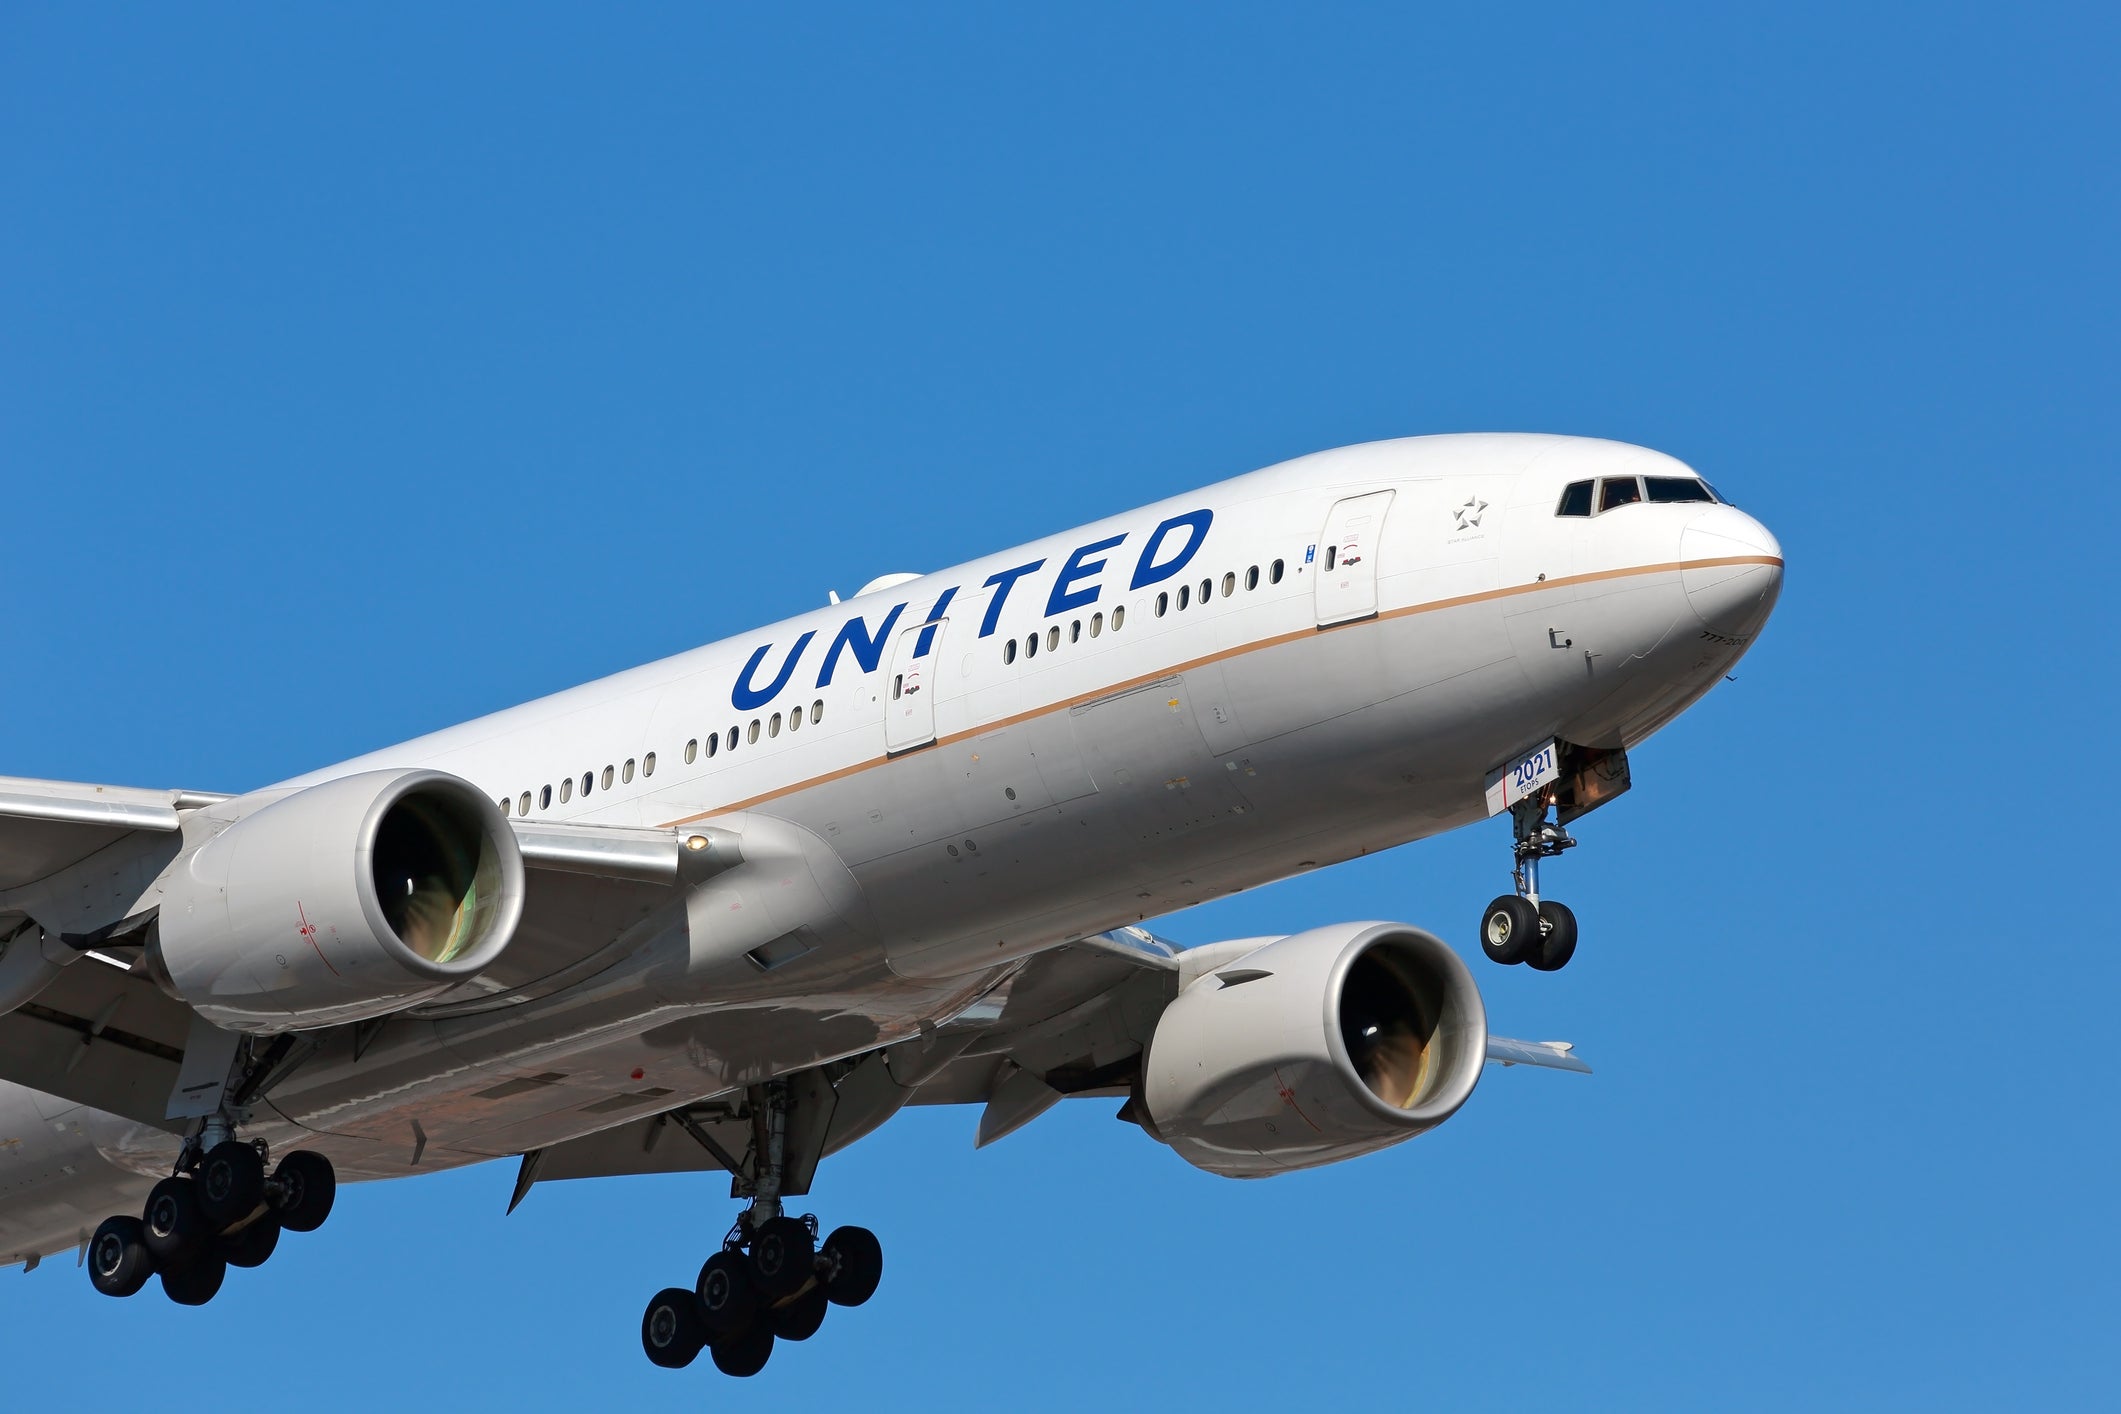 United Airlines has agreed to pay $30m to the family of a man who was left brain damaged after his removal from a flight